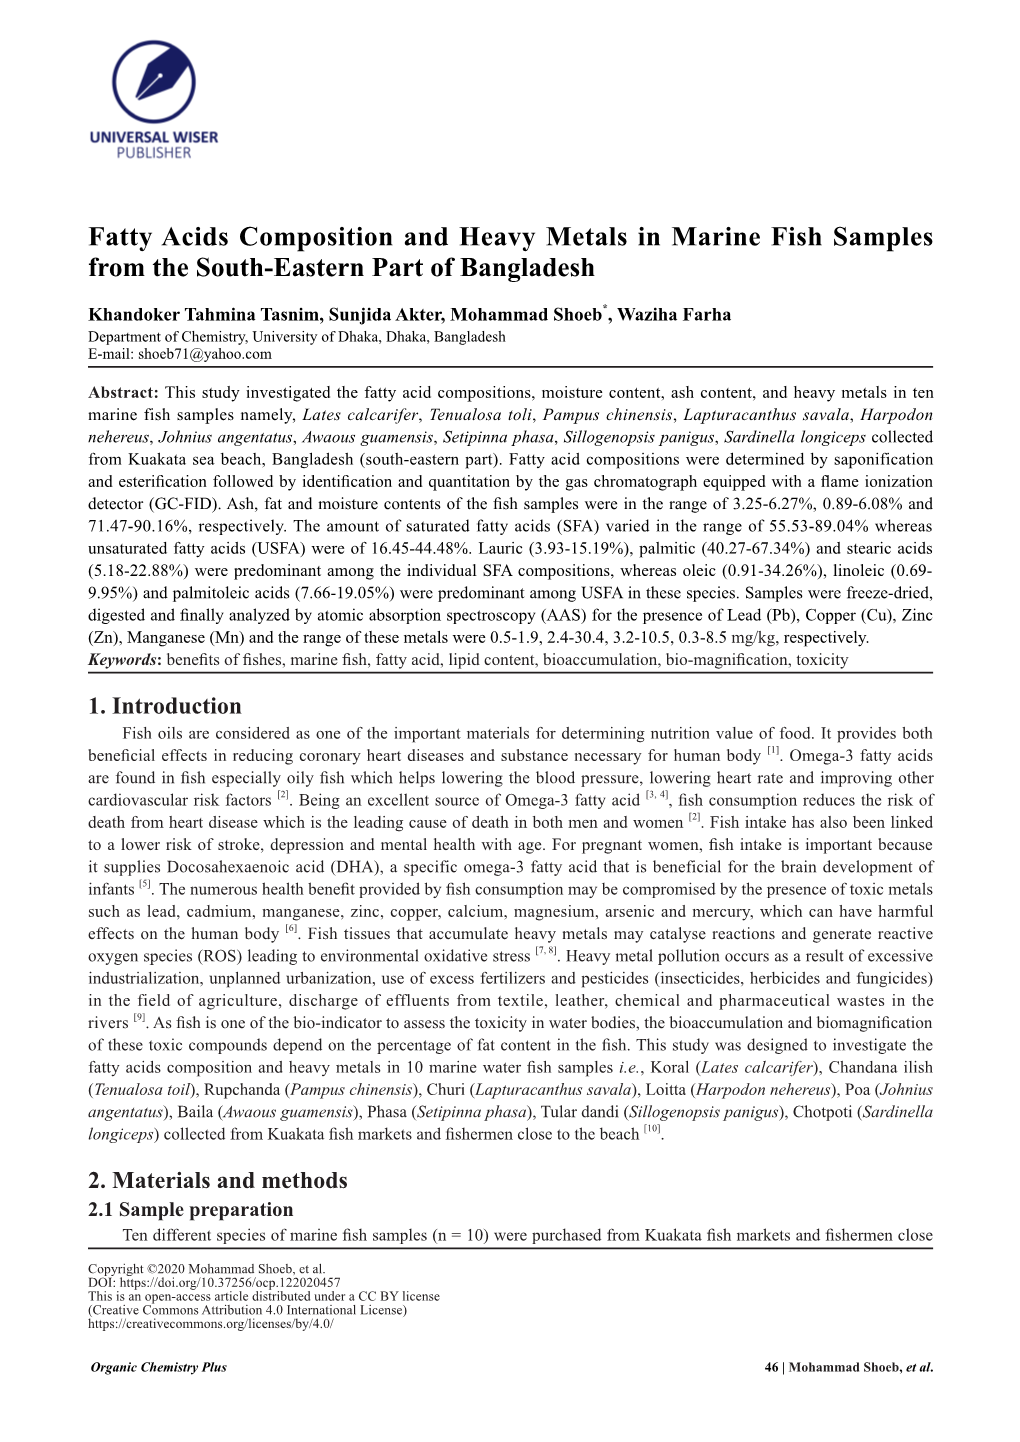 Fatty Acids Composition and Heavy Metals in Marine Fish Samples from the South-Eastern Part of Bangladesh